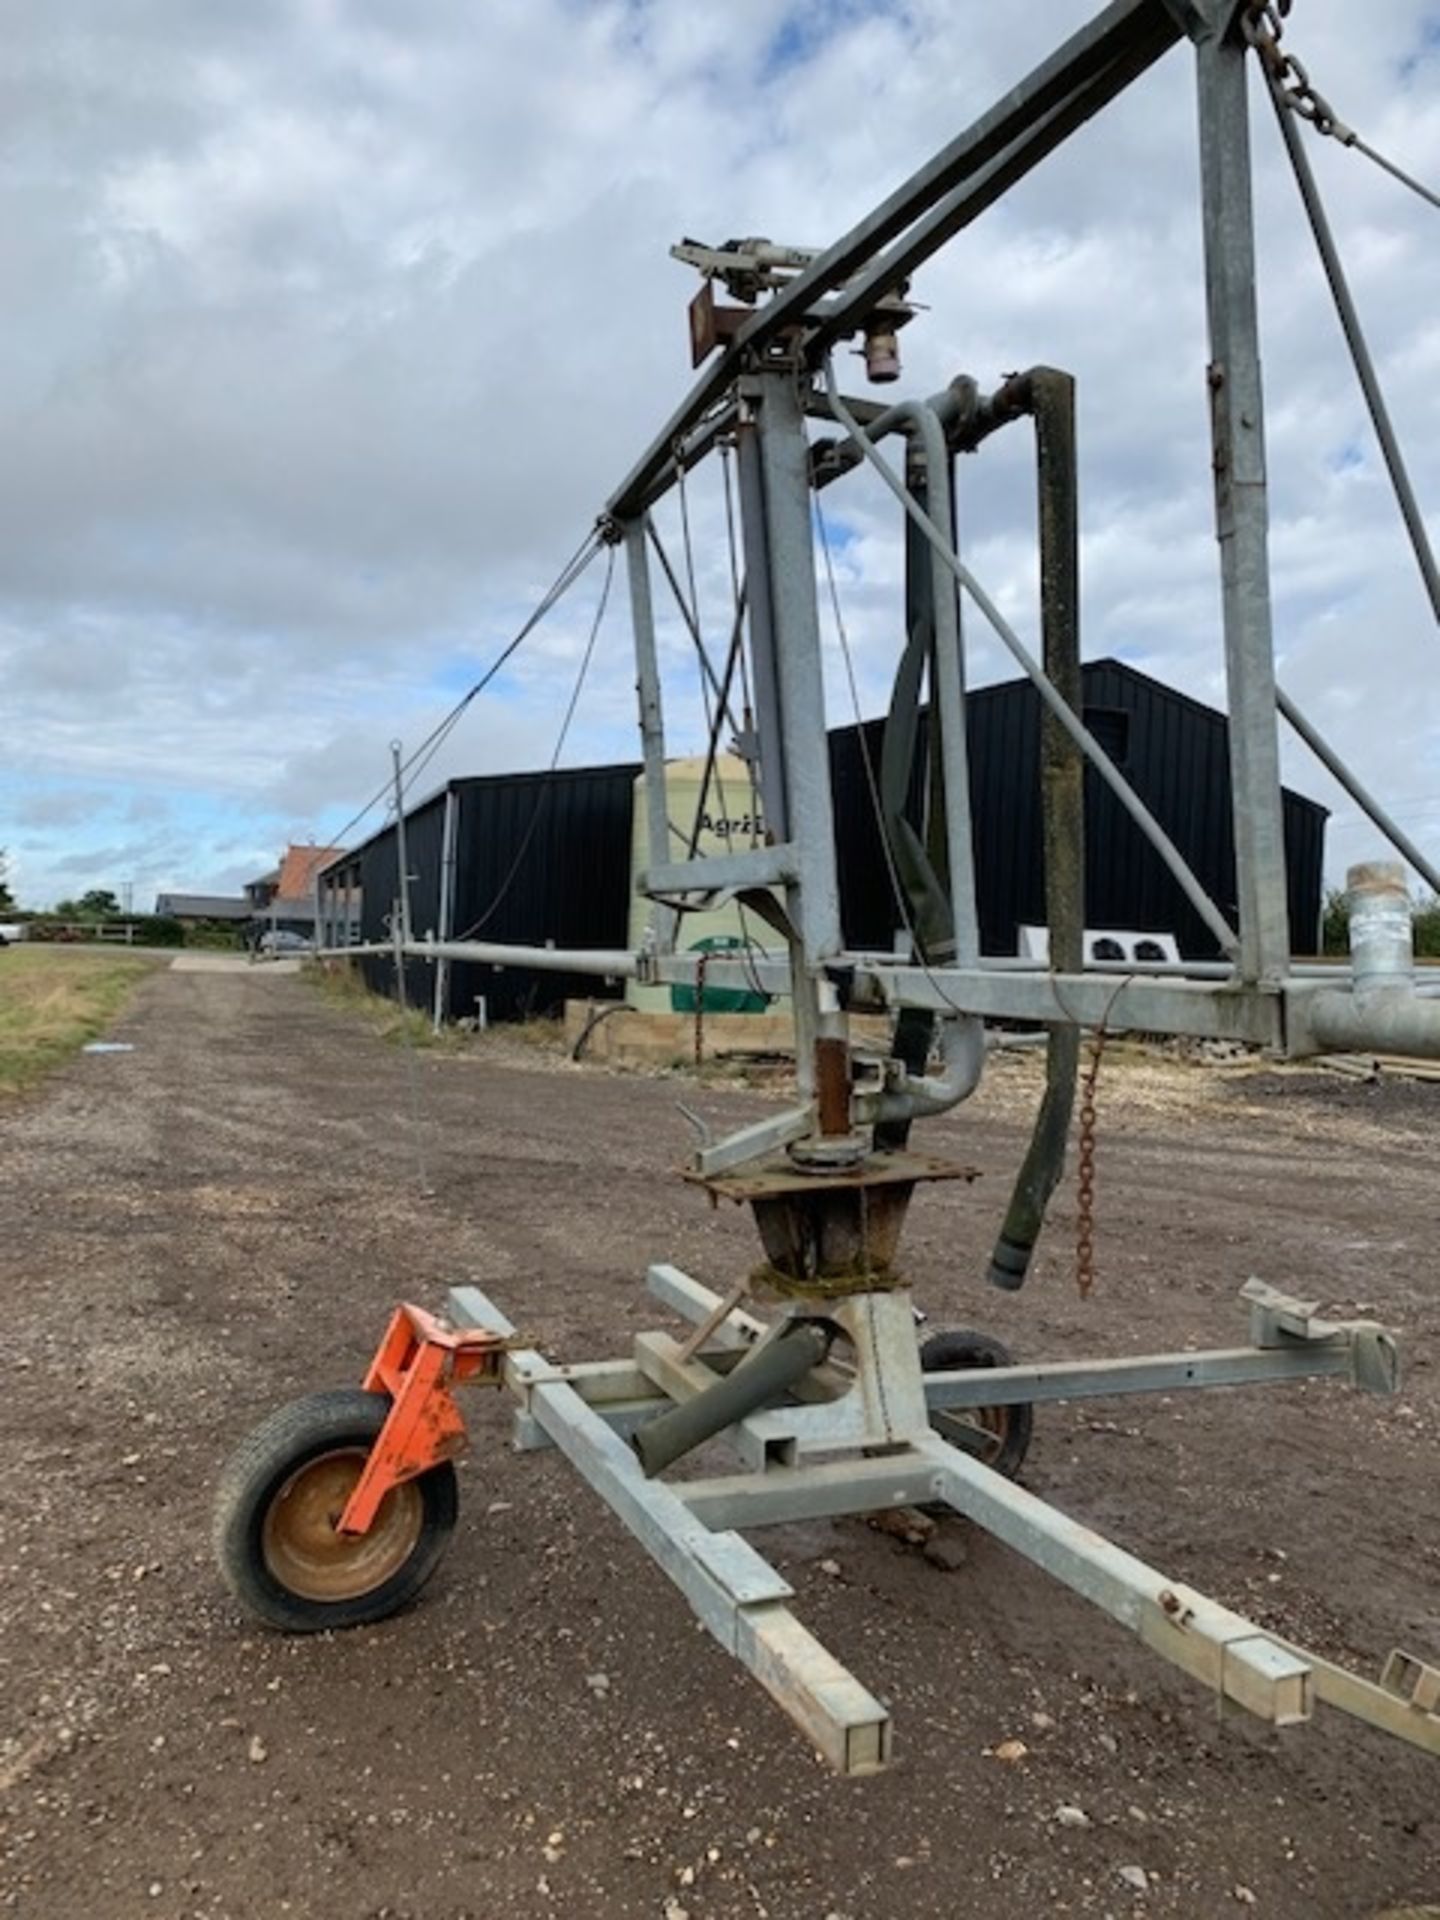 Bauer 64m spray boom irrigator. With 140 rain gun and further full boom section for spares. - Image 11 of 13